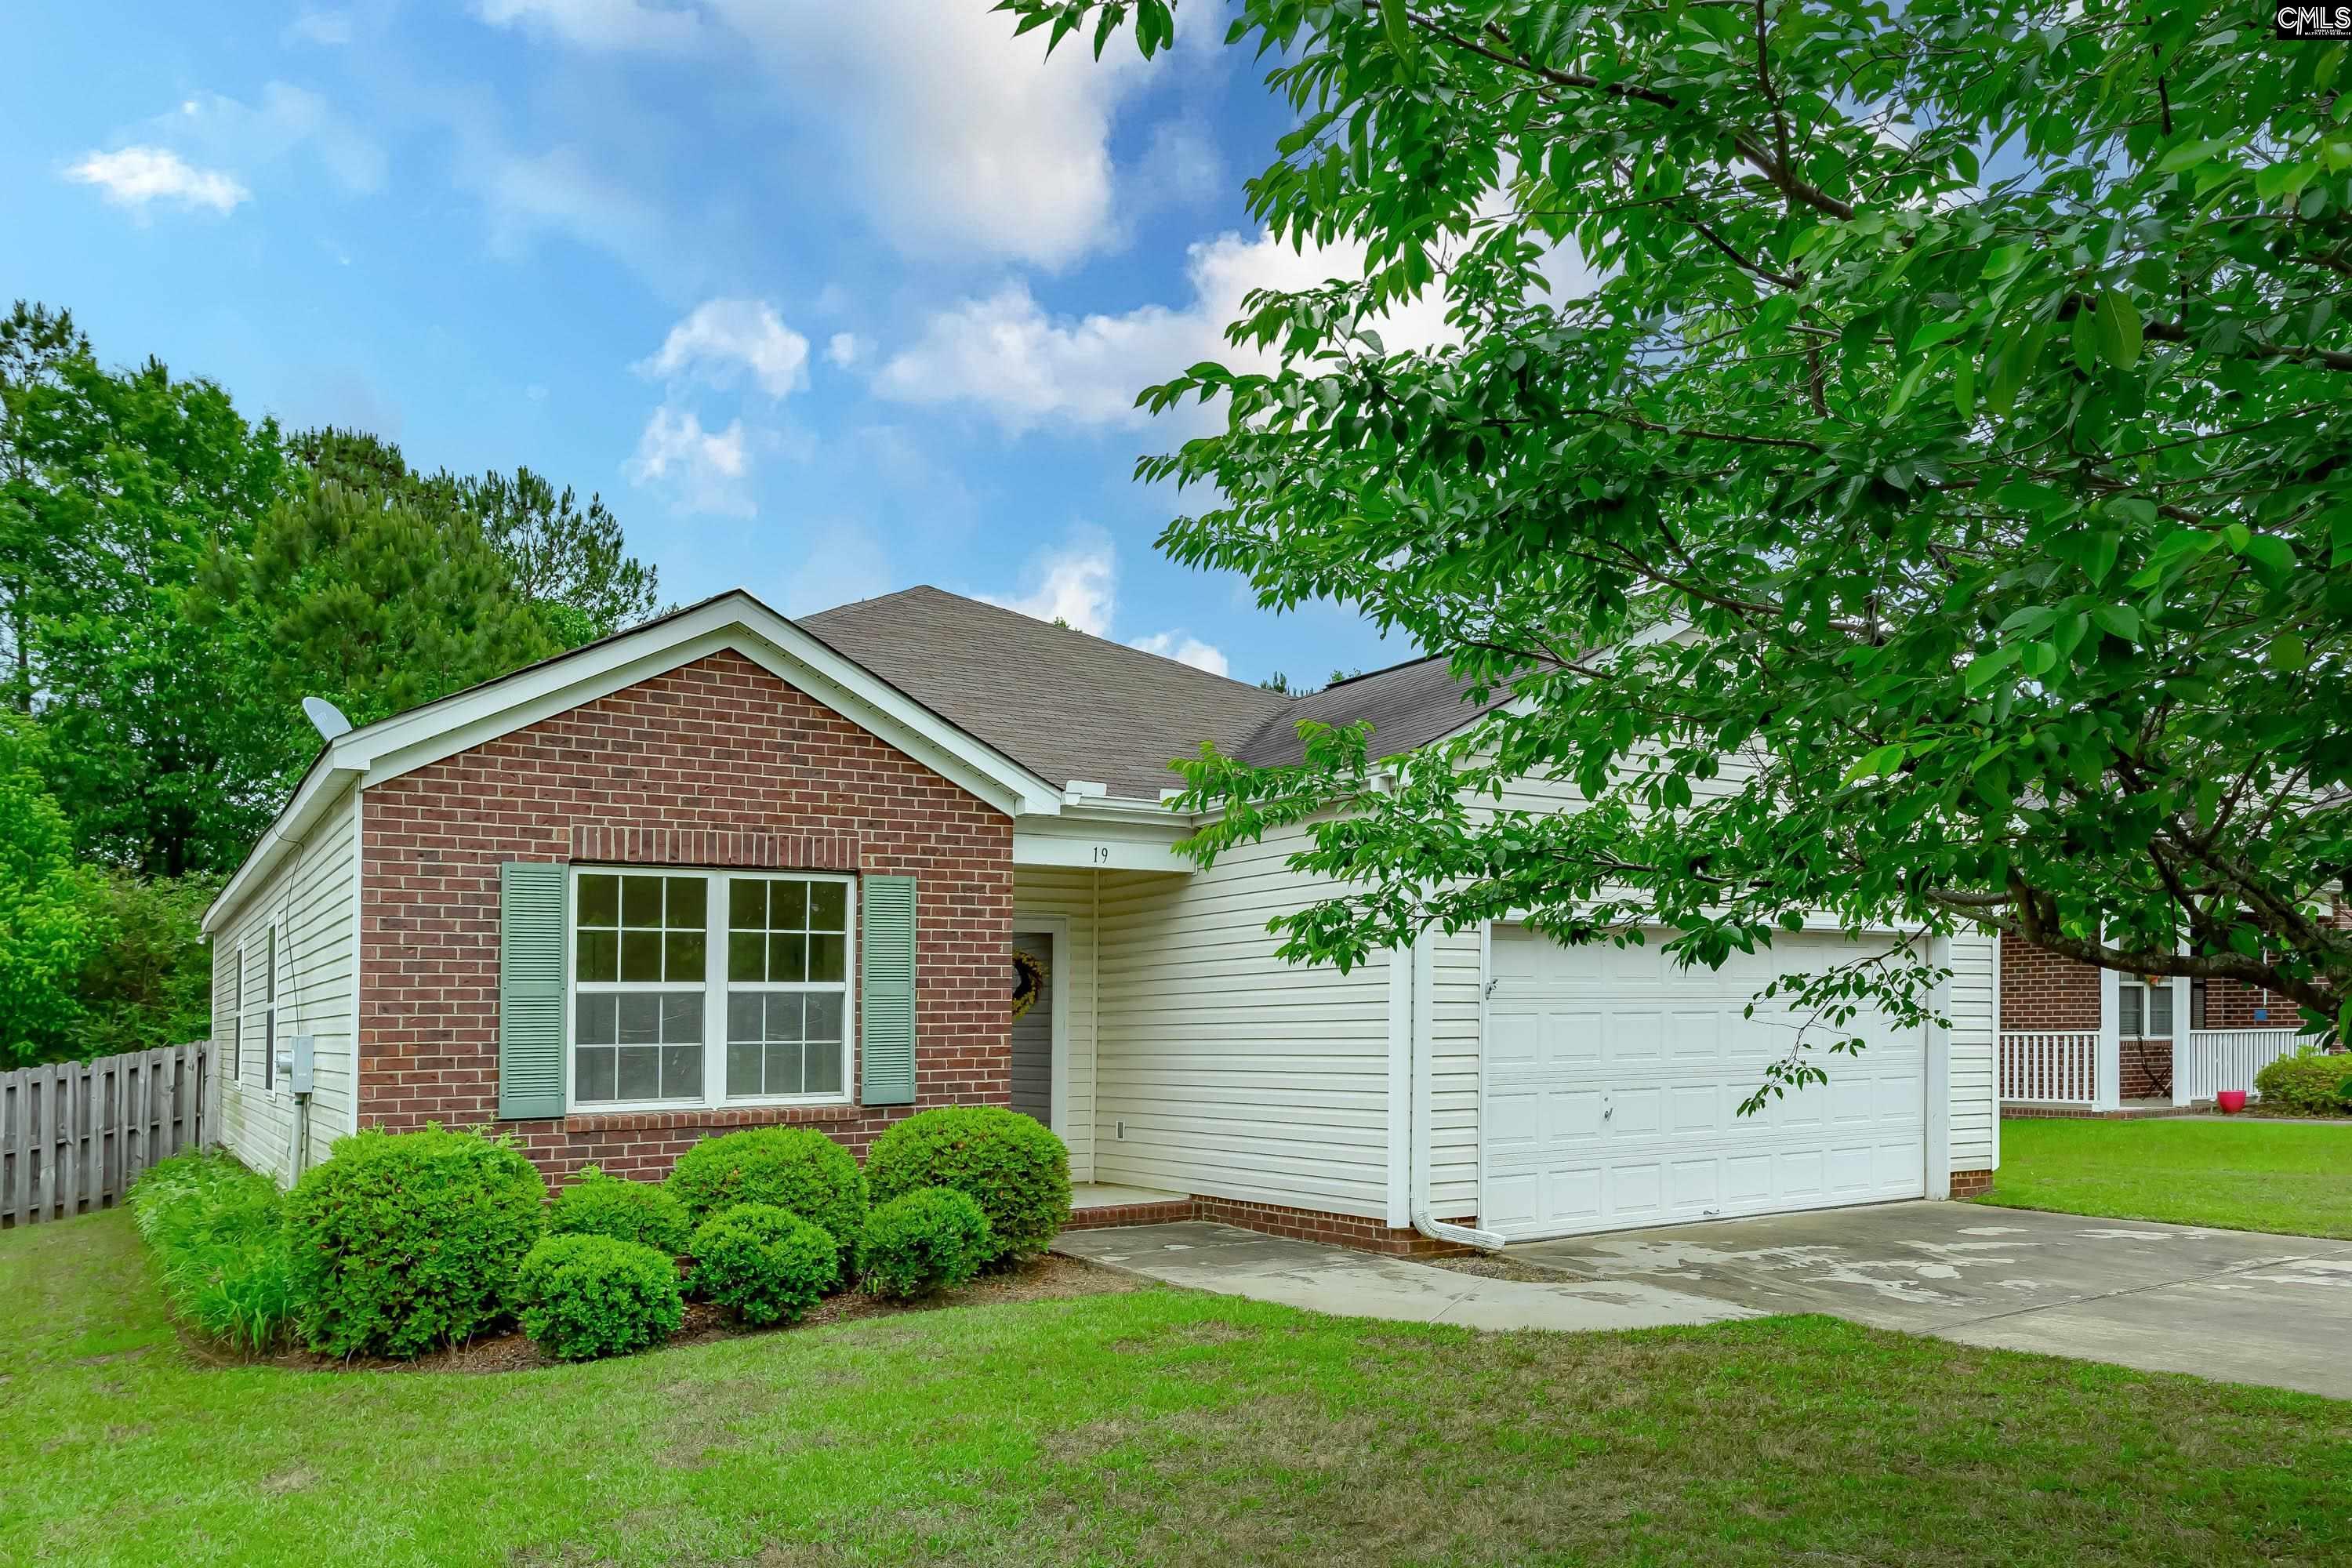 19 Yearling Court Irmo, SC 29063